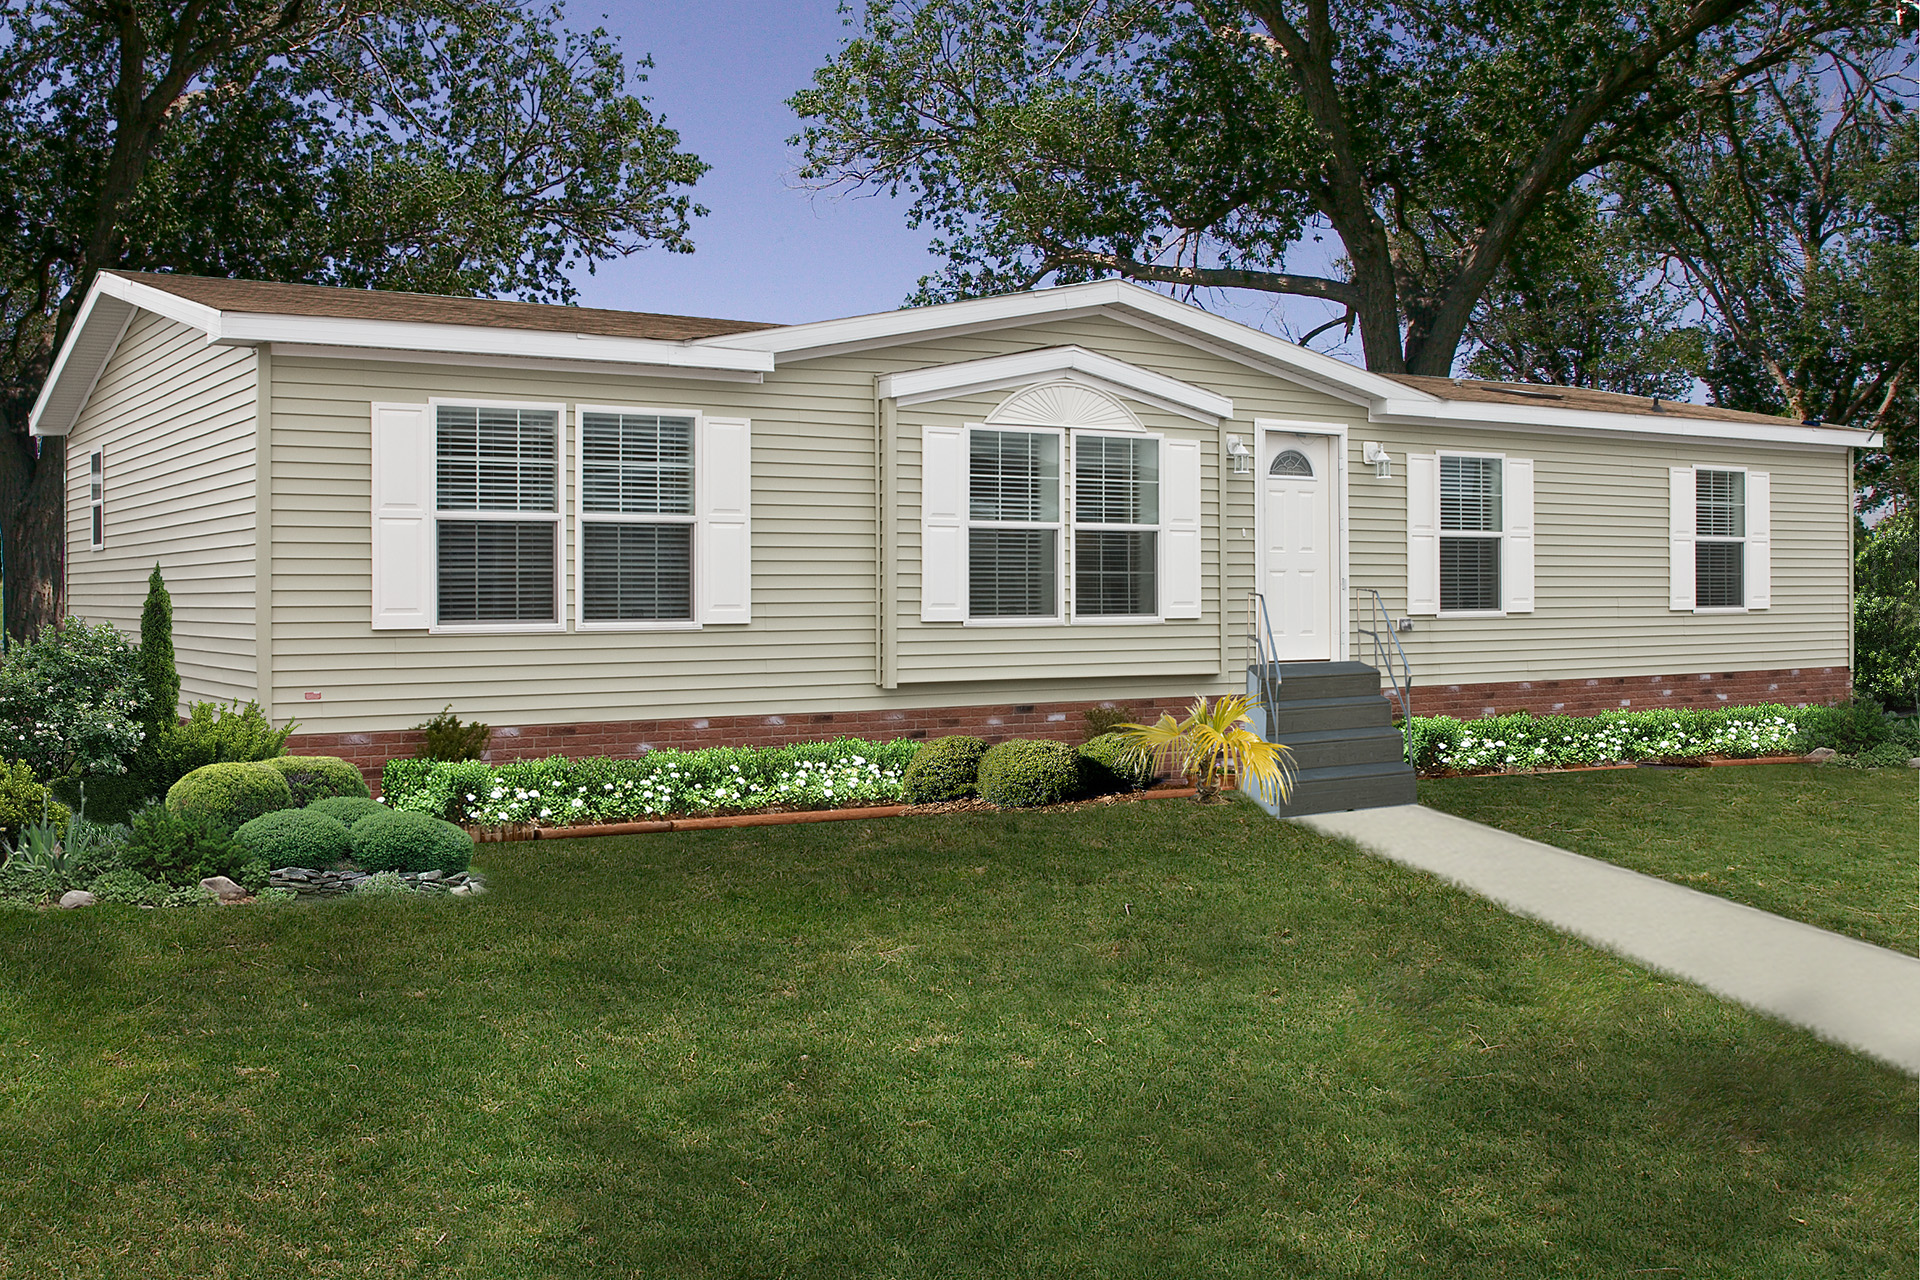  Four Benefits of Buying a Manufactured Home